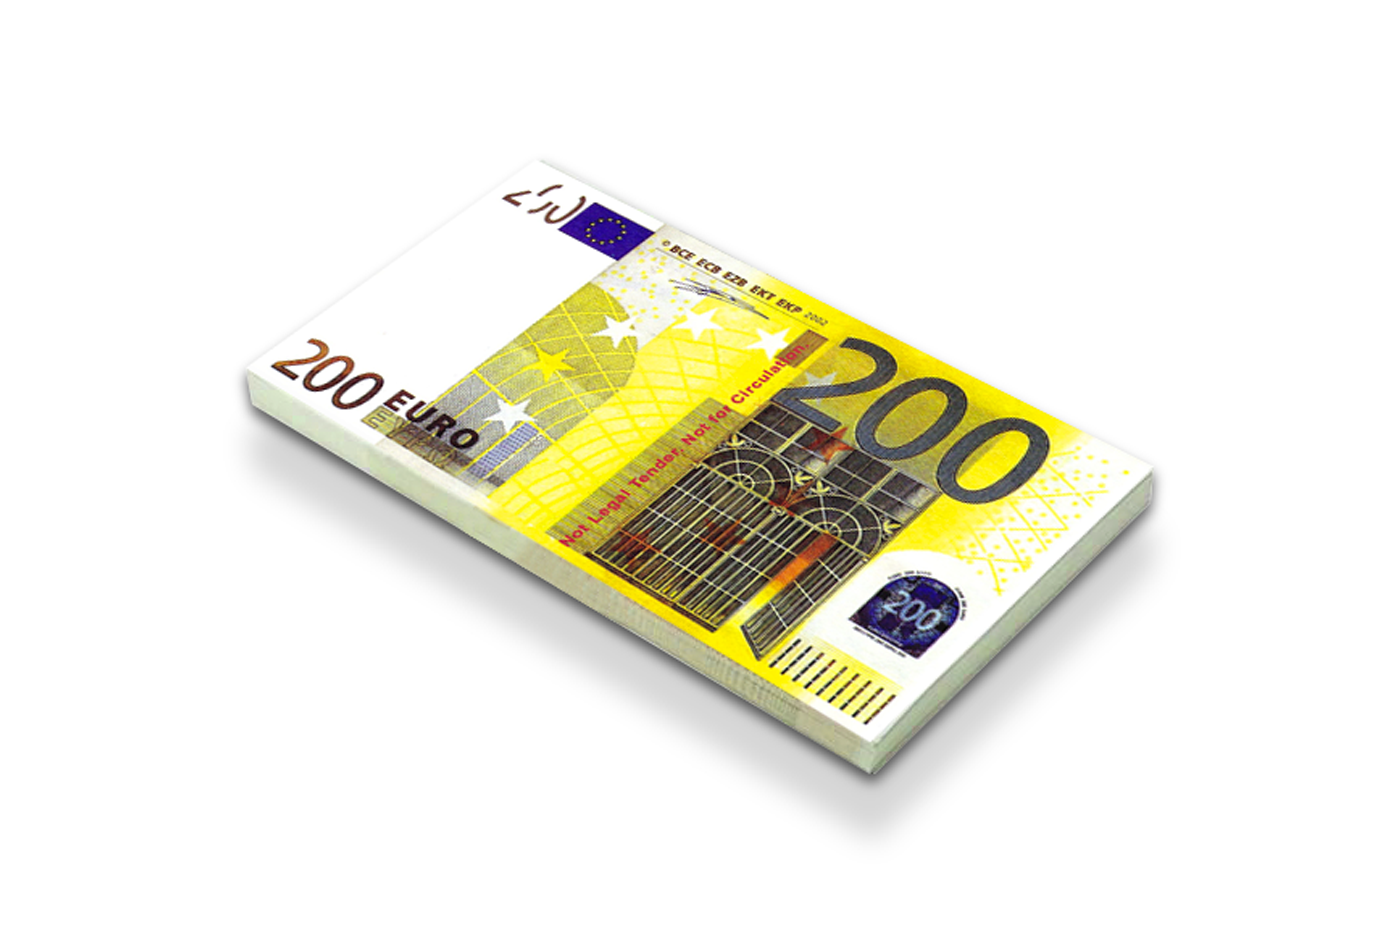 Euro 20,000 in prop money from Strobeprops. 1 stack of 200 Euros fake money used in movies, YouTube and TikTok videos.